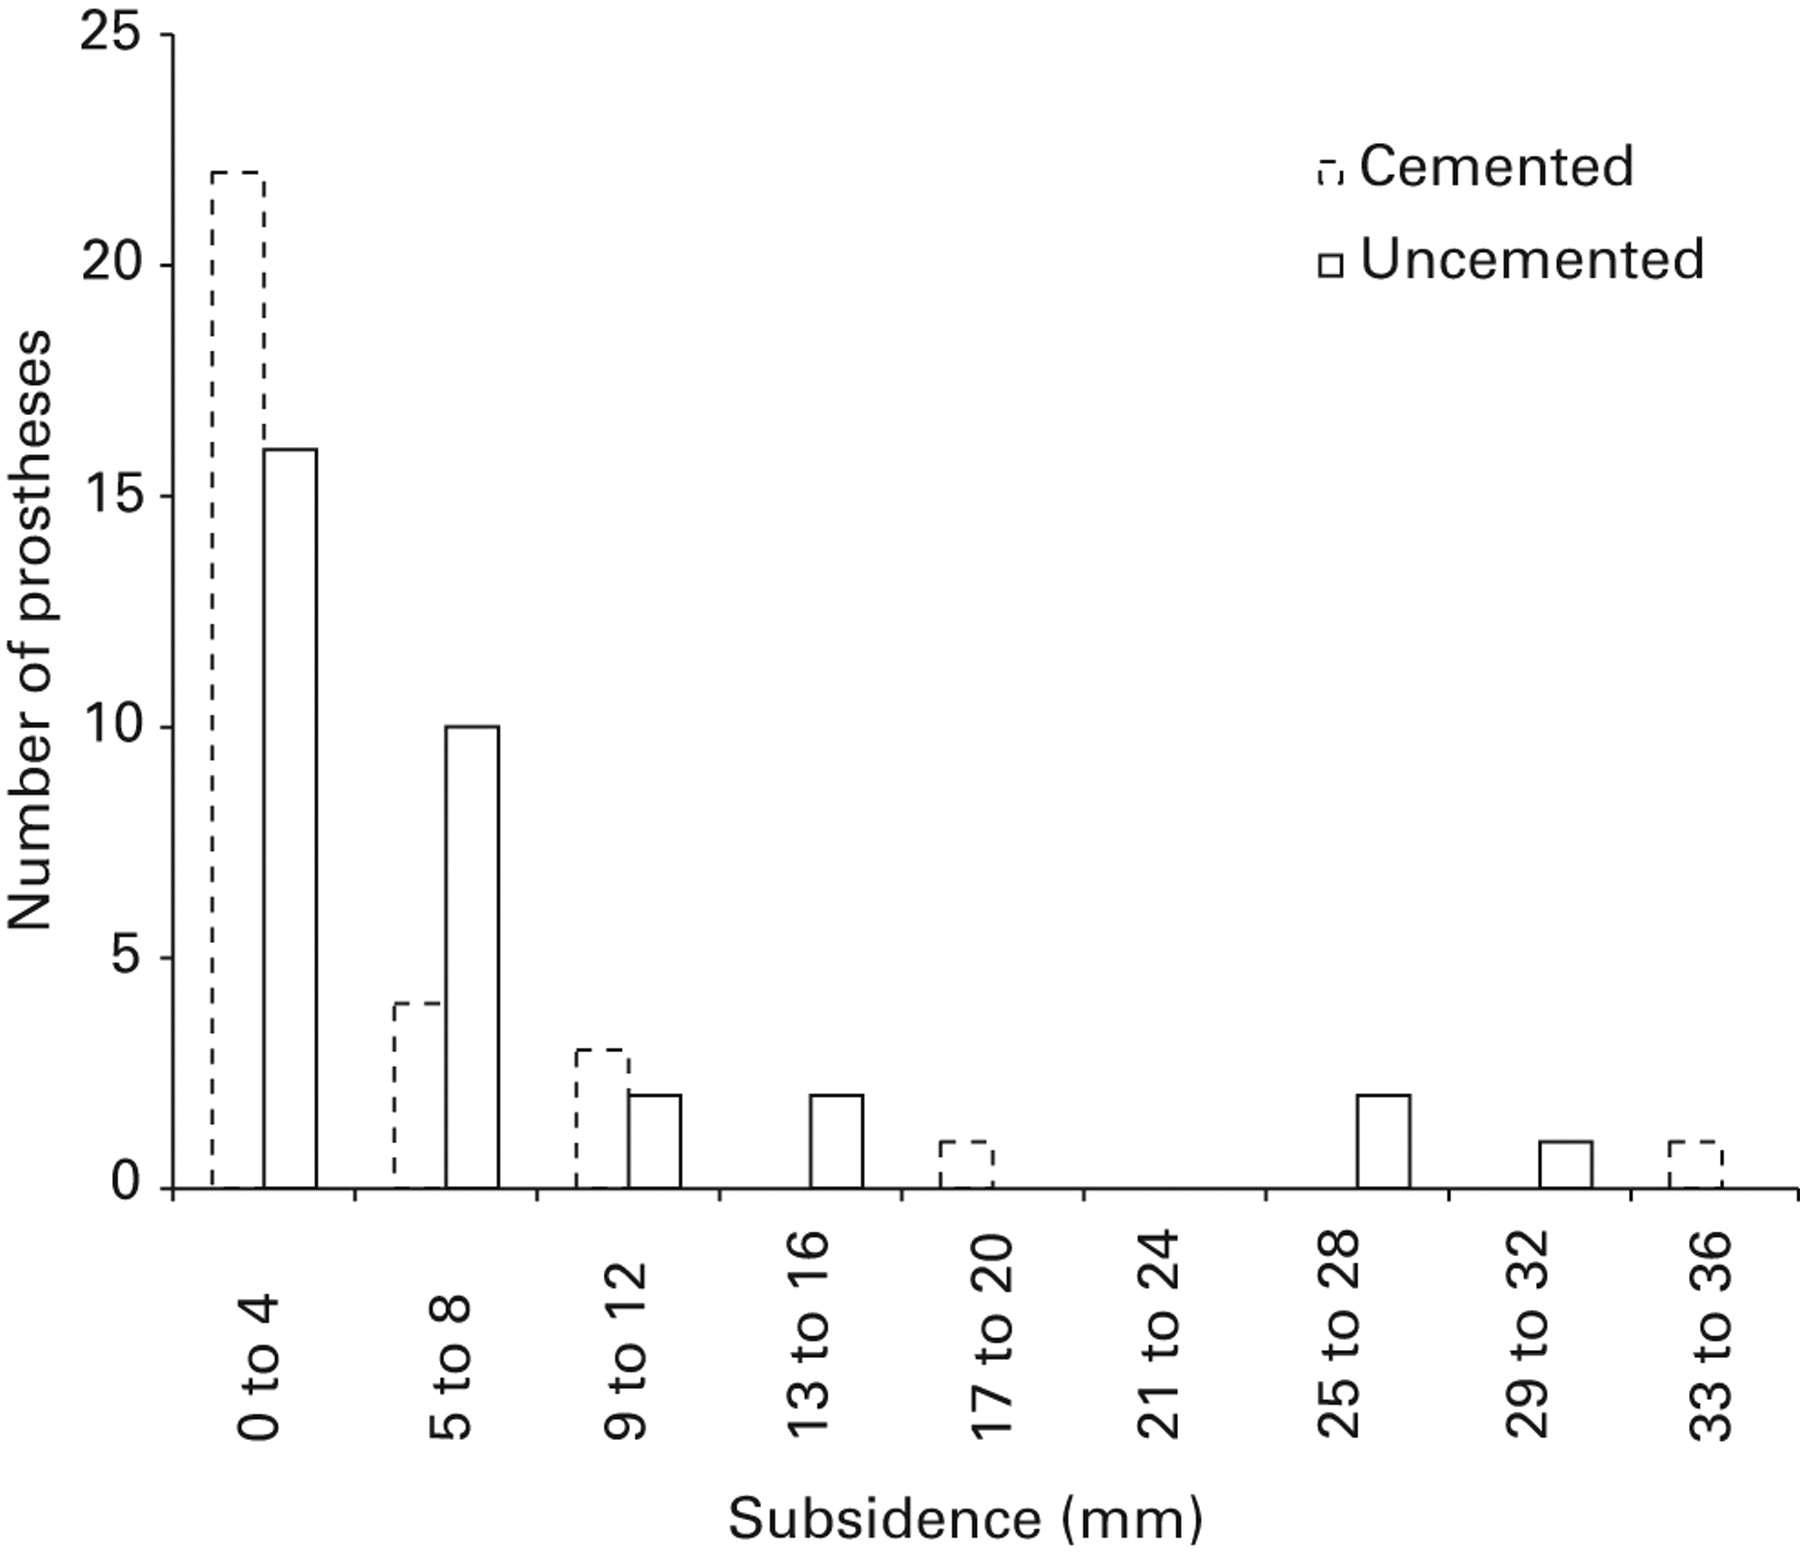 Fig. 3 
            Bar chart showing the overall subsidence
rates at the final follow-up for uncemented and cemented groups.
          